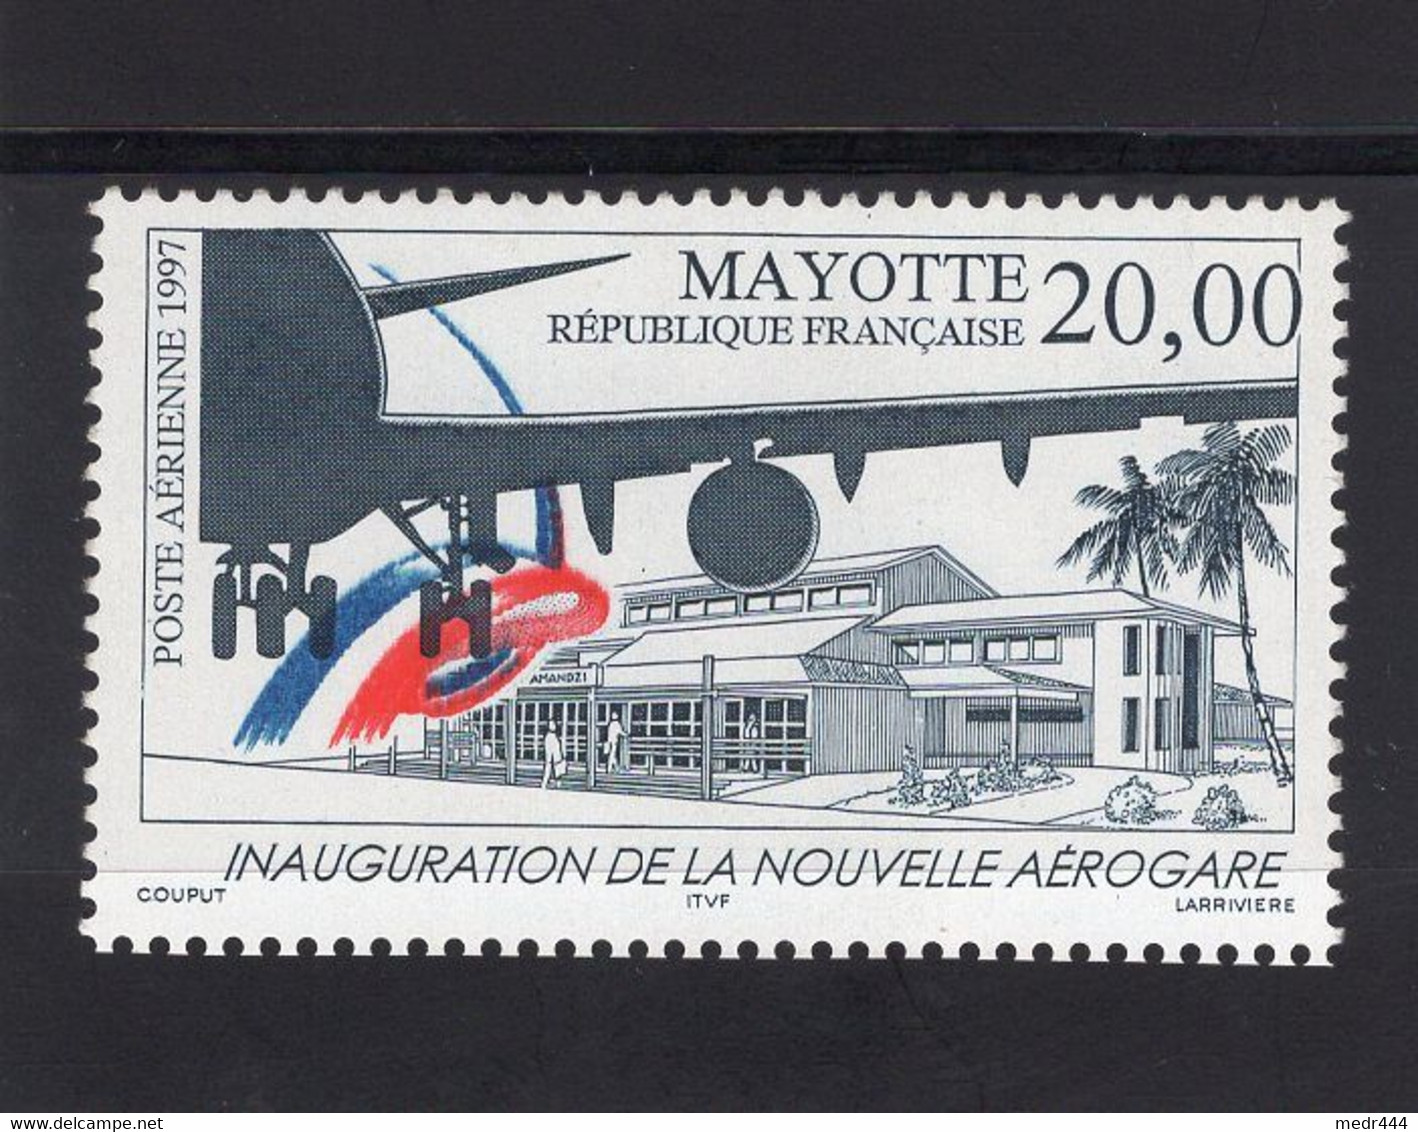 Mayotte 1997 - Airmail - Inauguration Of The New Airport - Stamp - Complete Set - MNH** Excellent Quality - Luftpost